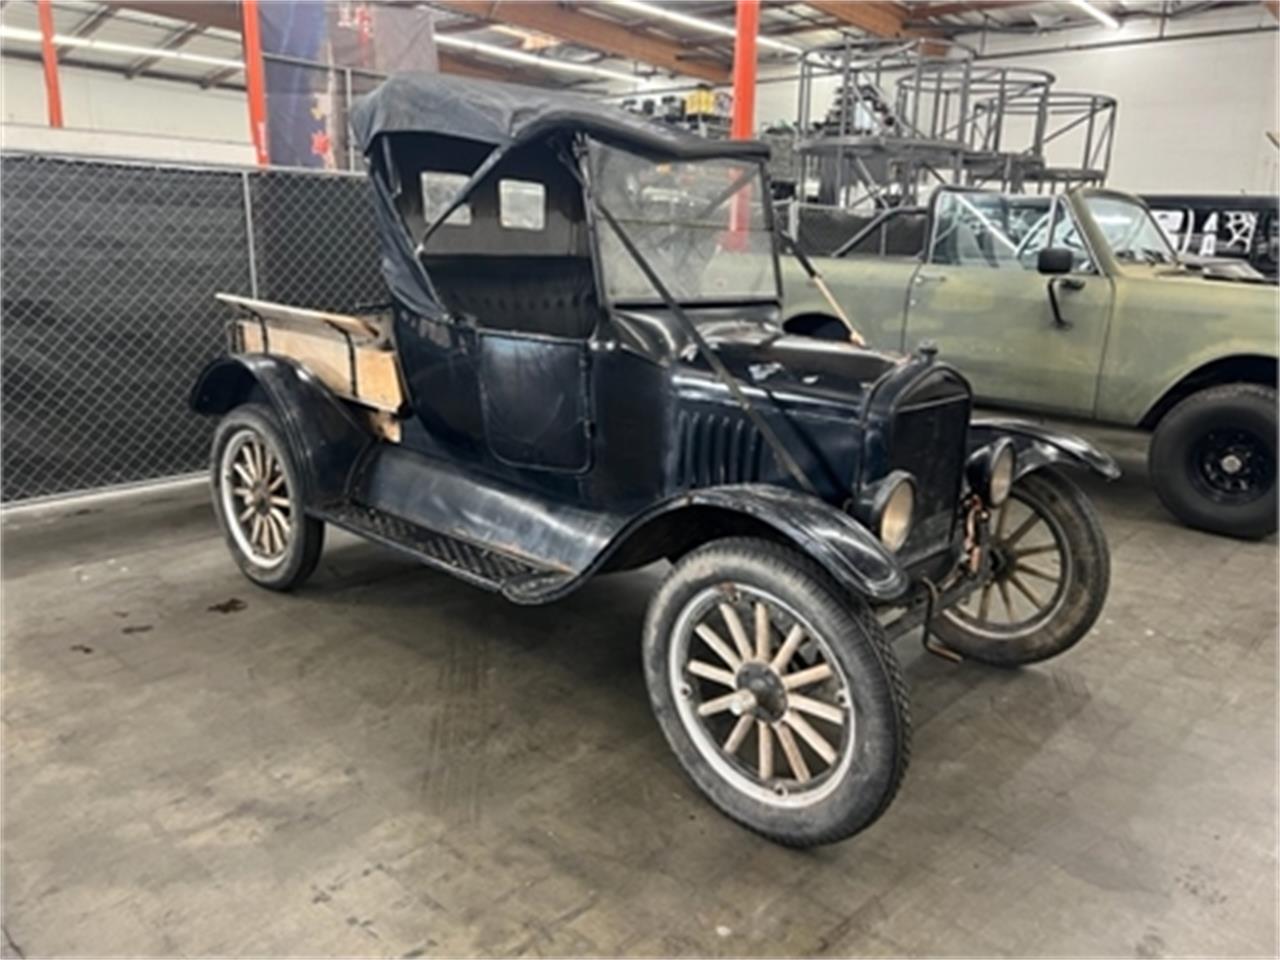 For Sale: 1925 Ford Model T in North Hollywood, California for sale in North Hollywood, CA